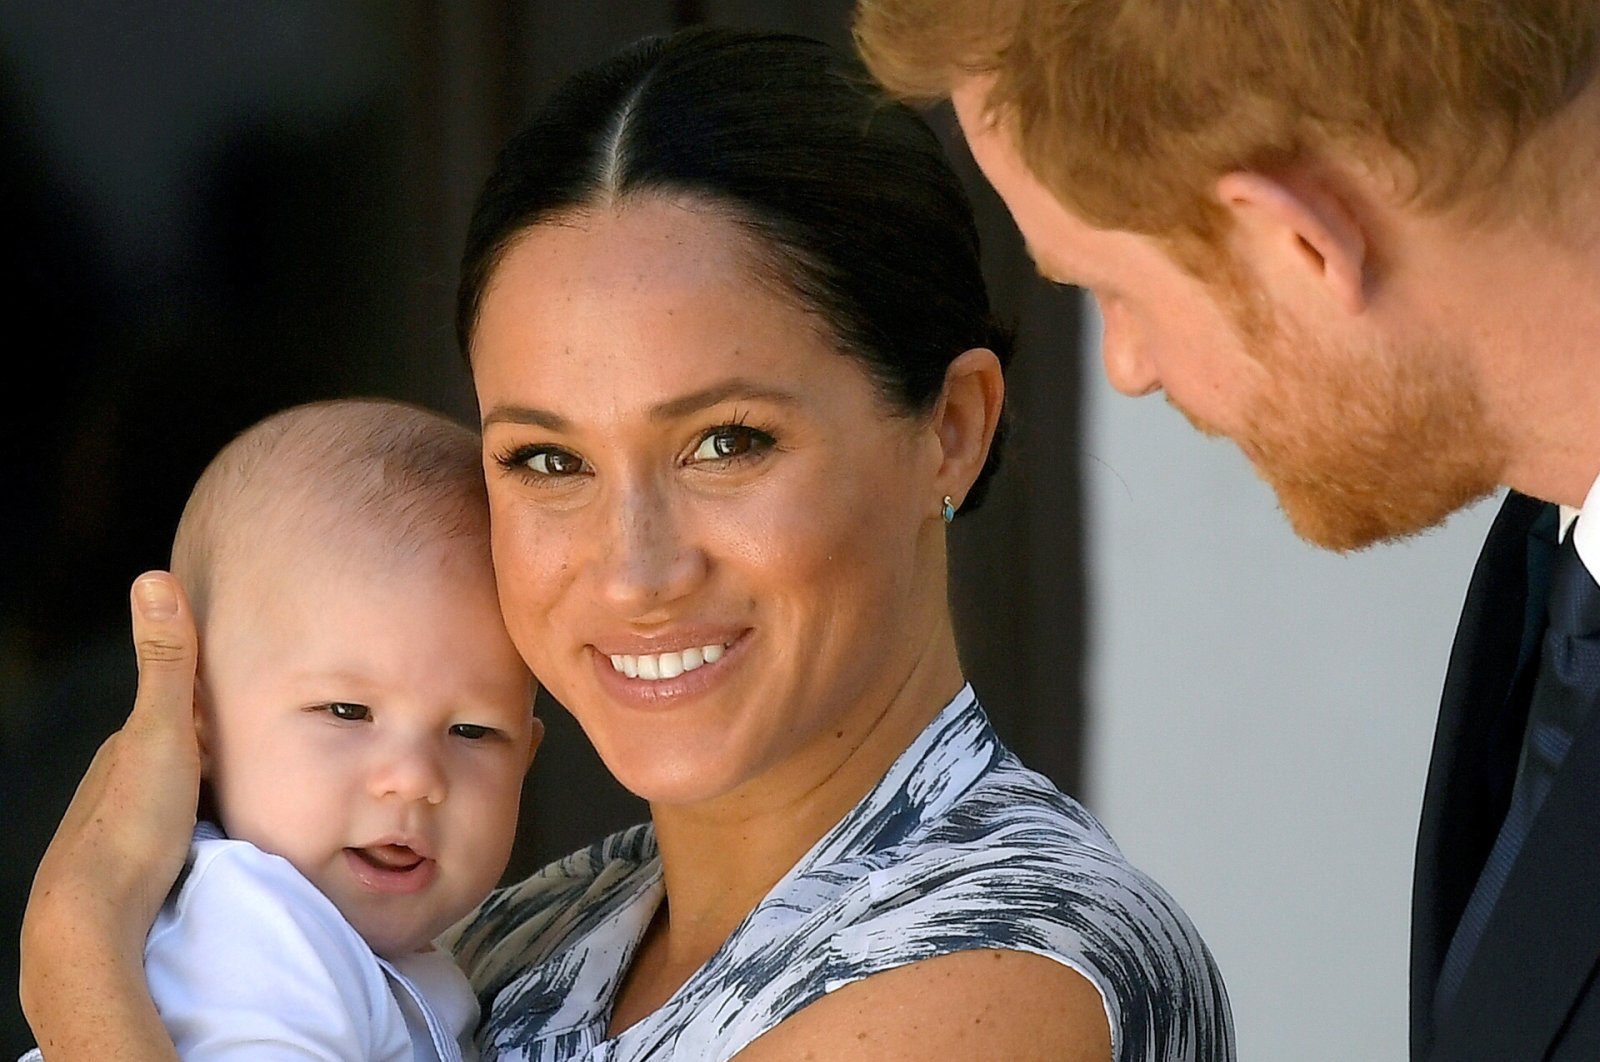 Britain&#039;s Prince Harry and his wife Meghan, Duchess of Sussex holding their son Archie, meet Archbishop Desmond Tutu (not pictured) at the Desmond &amp; Leah Tutu Legacy Foundation in Cape Town, South Africa, Sept. 25, 2019. (Reuters Photo)